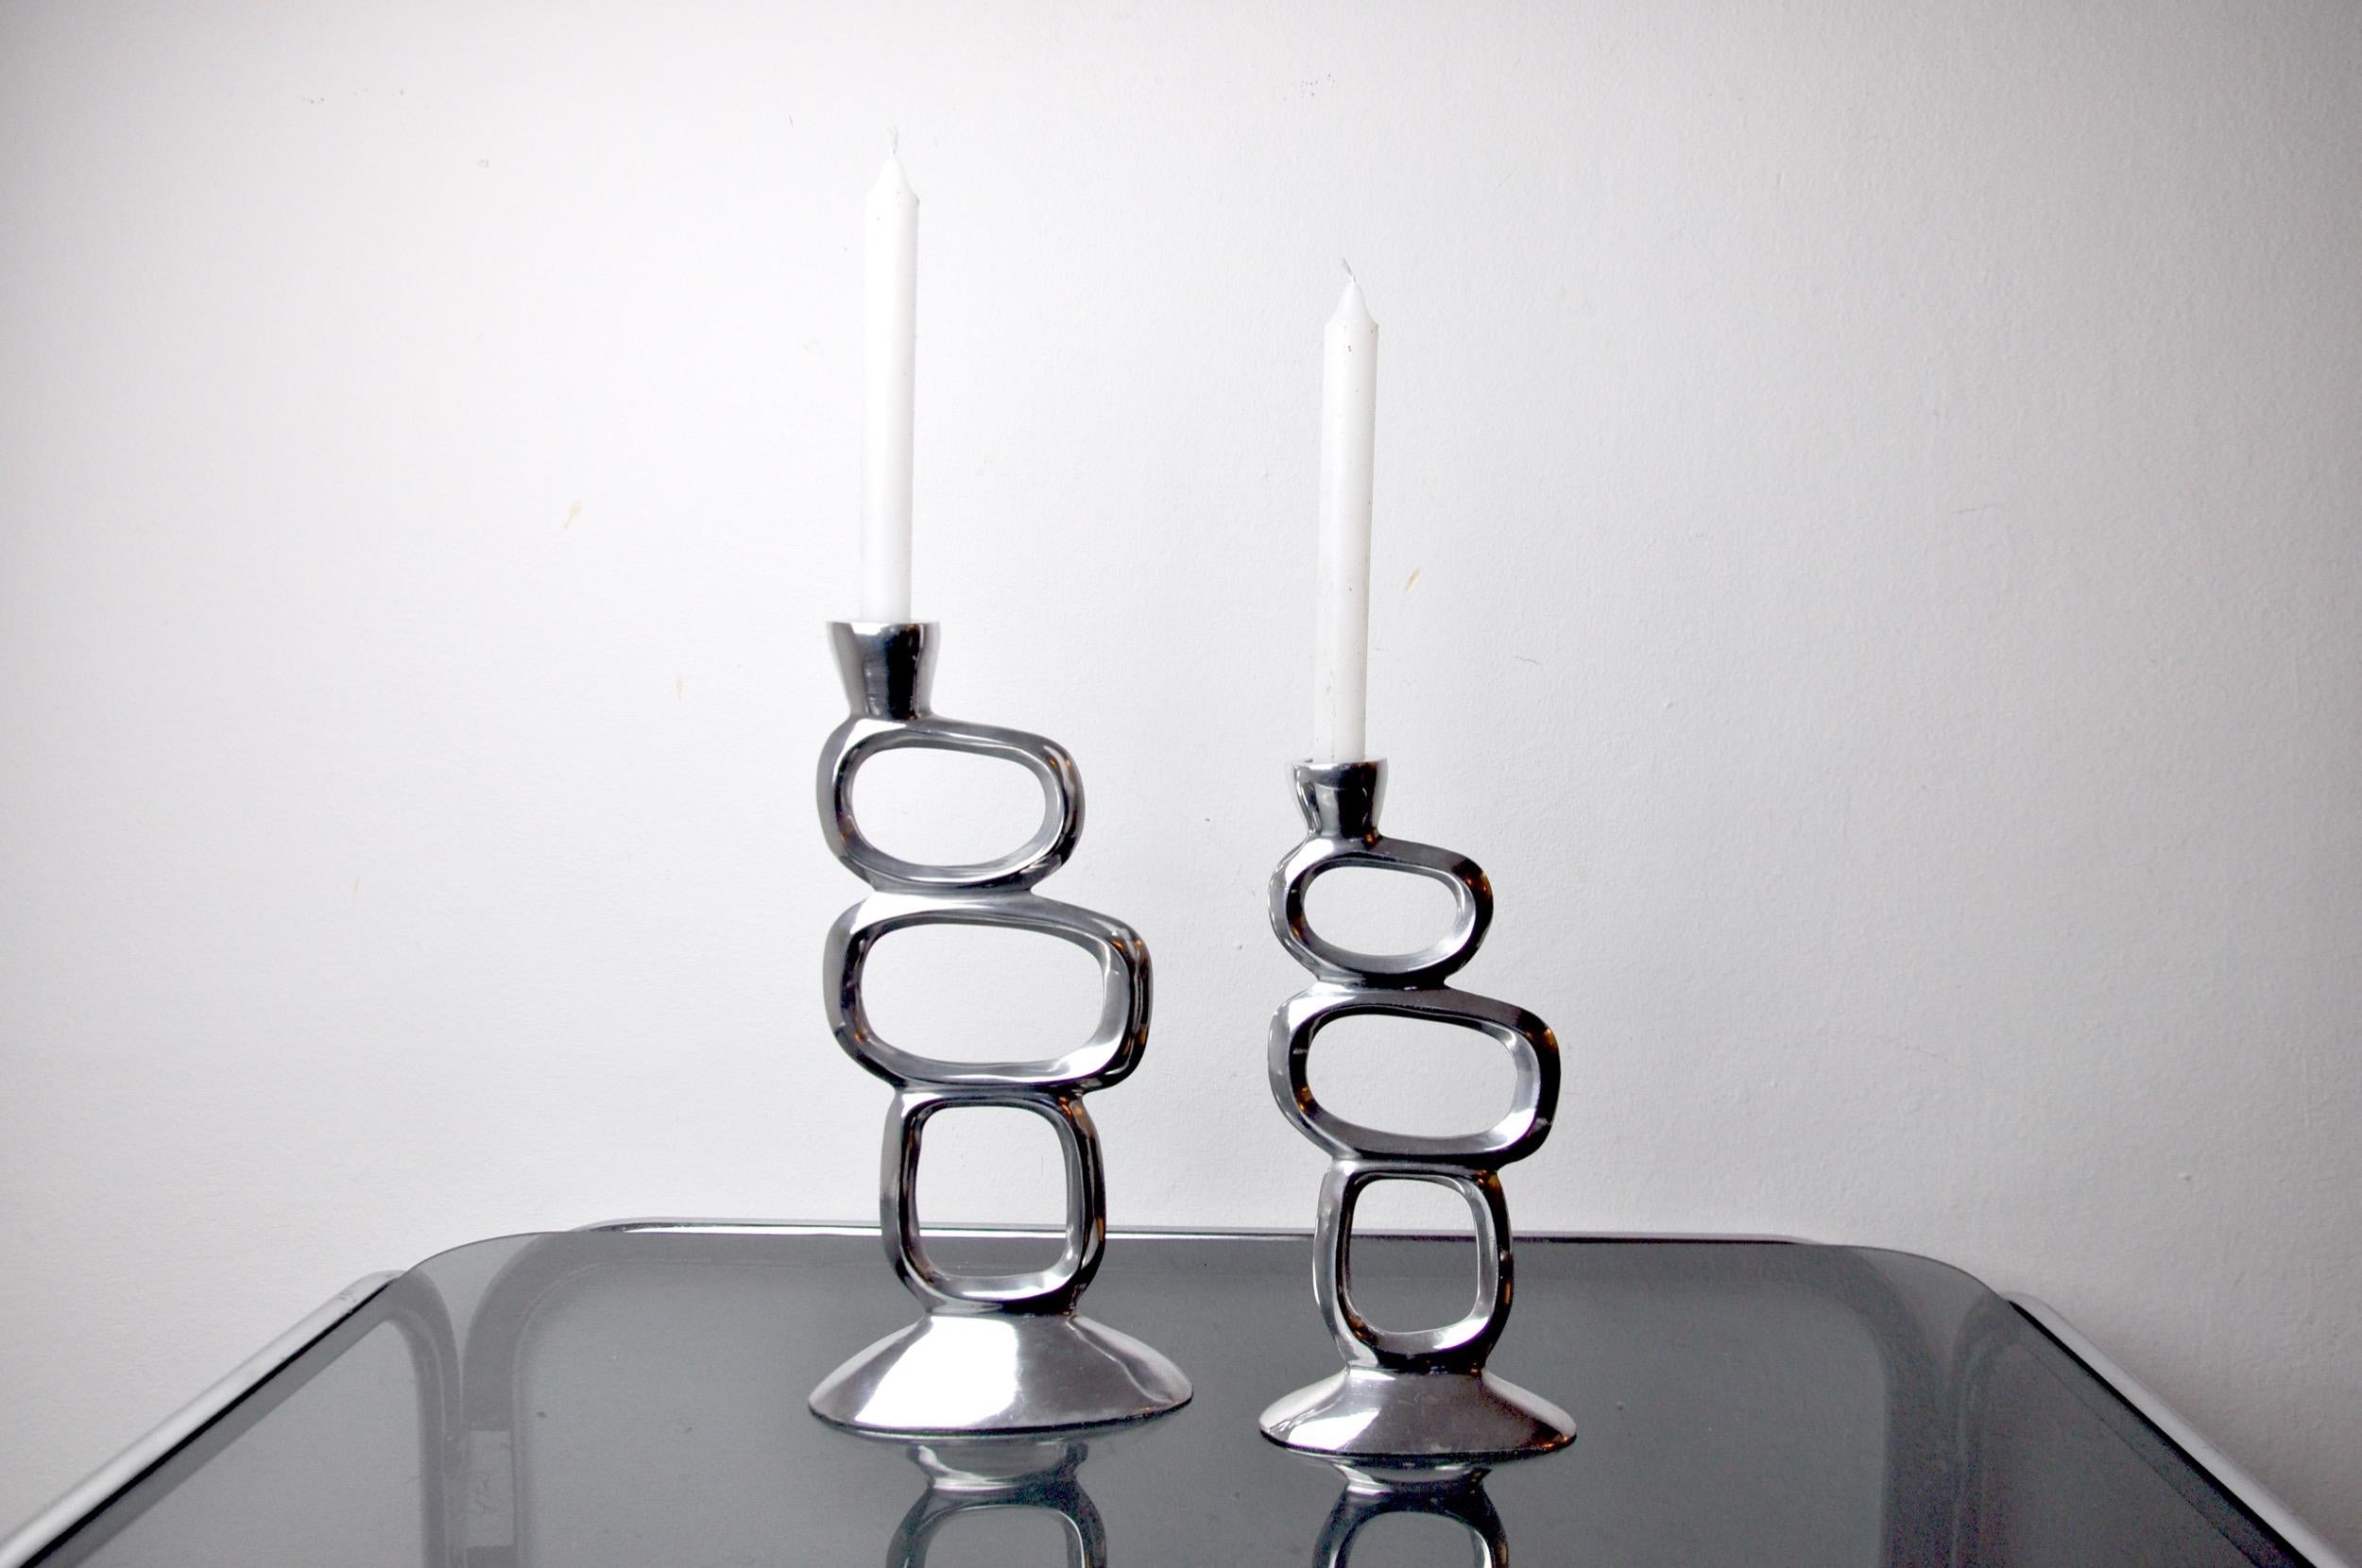 Pair of circle candlesticks designed and produced by matthew hilton in england in the 1980s.

Set of two brutalist-style aluminum candle holders.

Beautiful decorative objects that will bring a real design touch to your interior.

Very nice